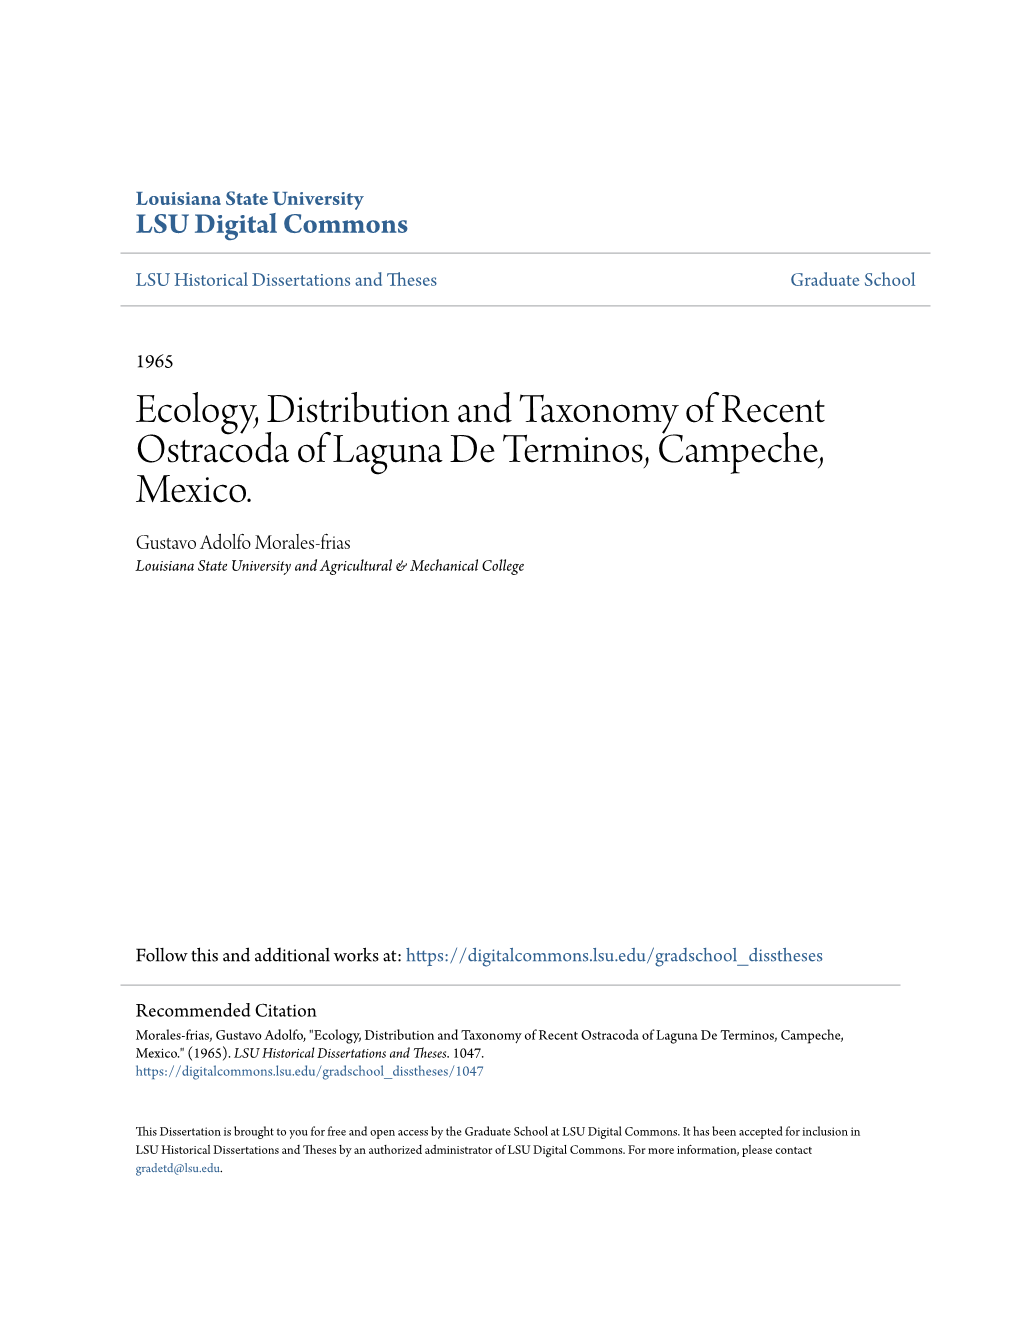 Ecology, Distribution and Taxonomy of Recent Ostracoda of Laguna De Terminos, Campeche, Mexico